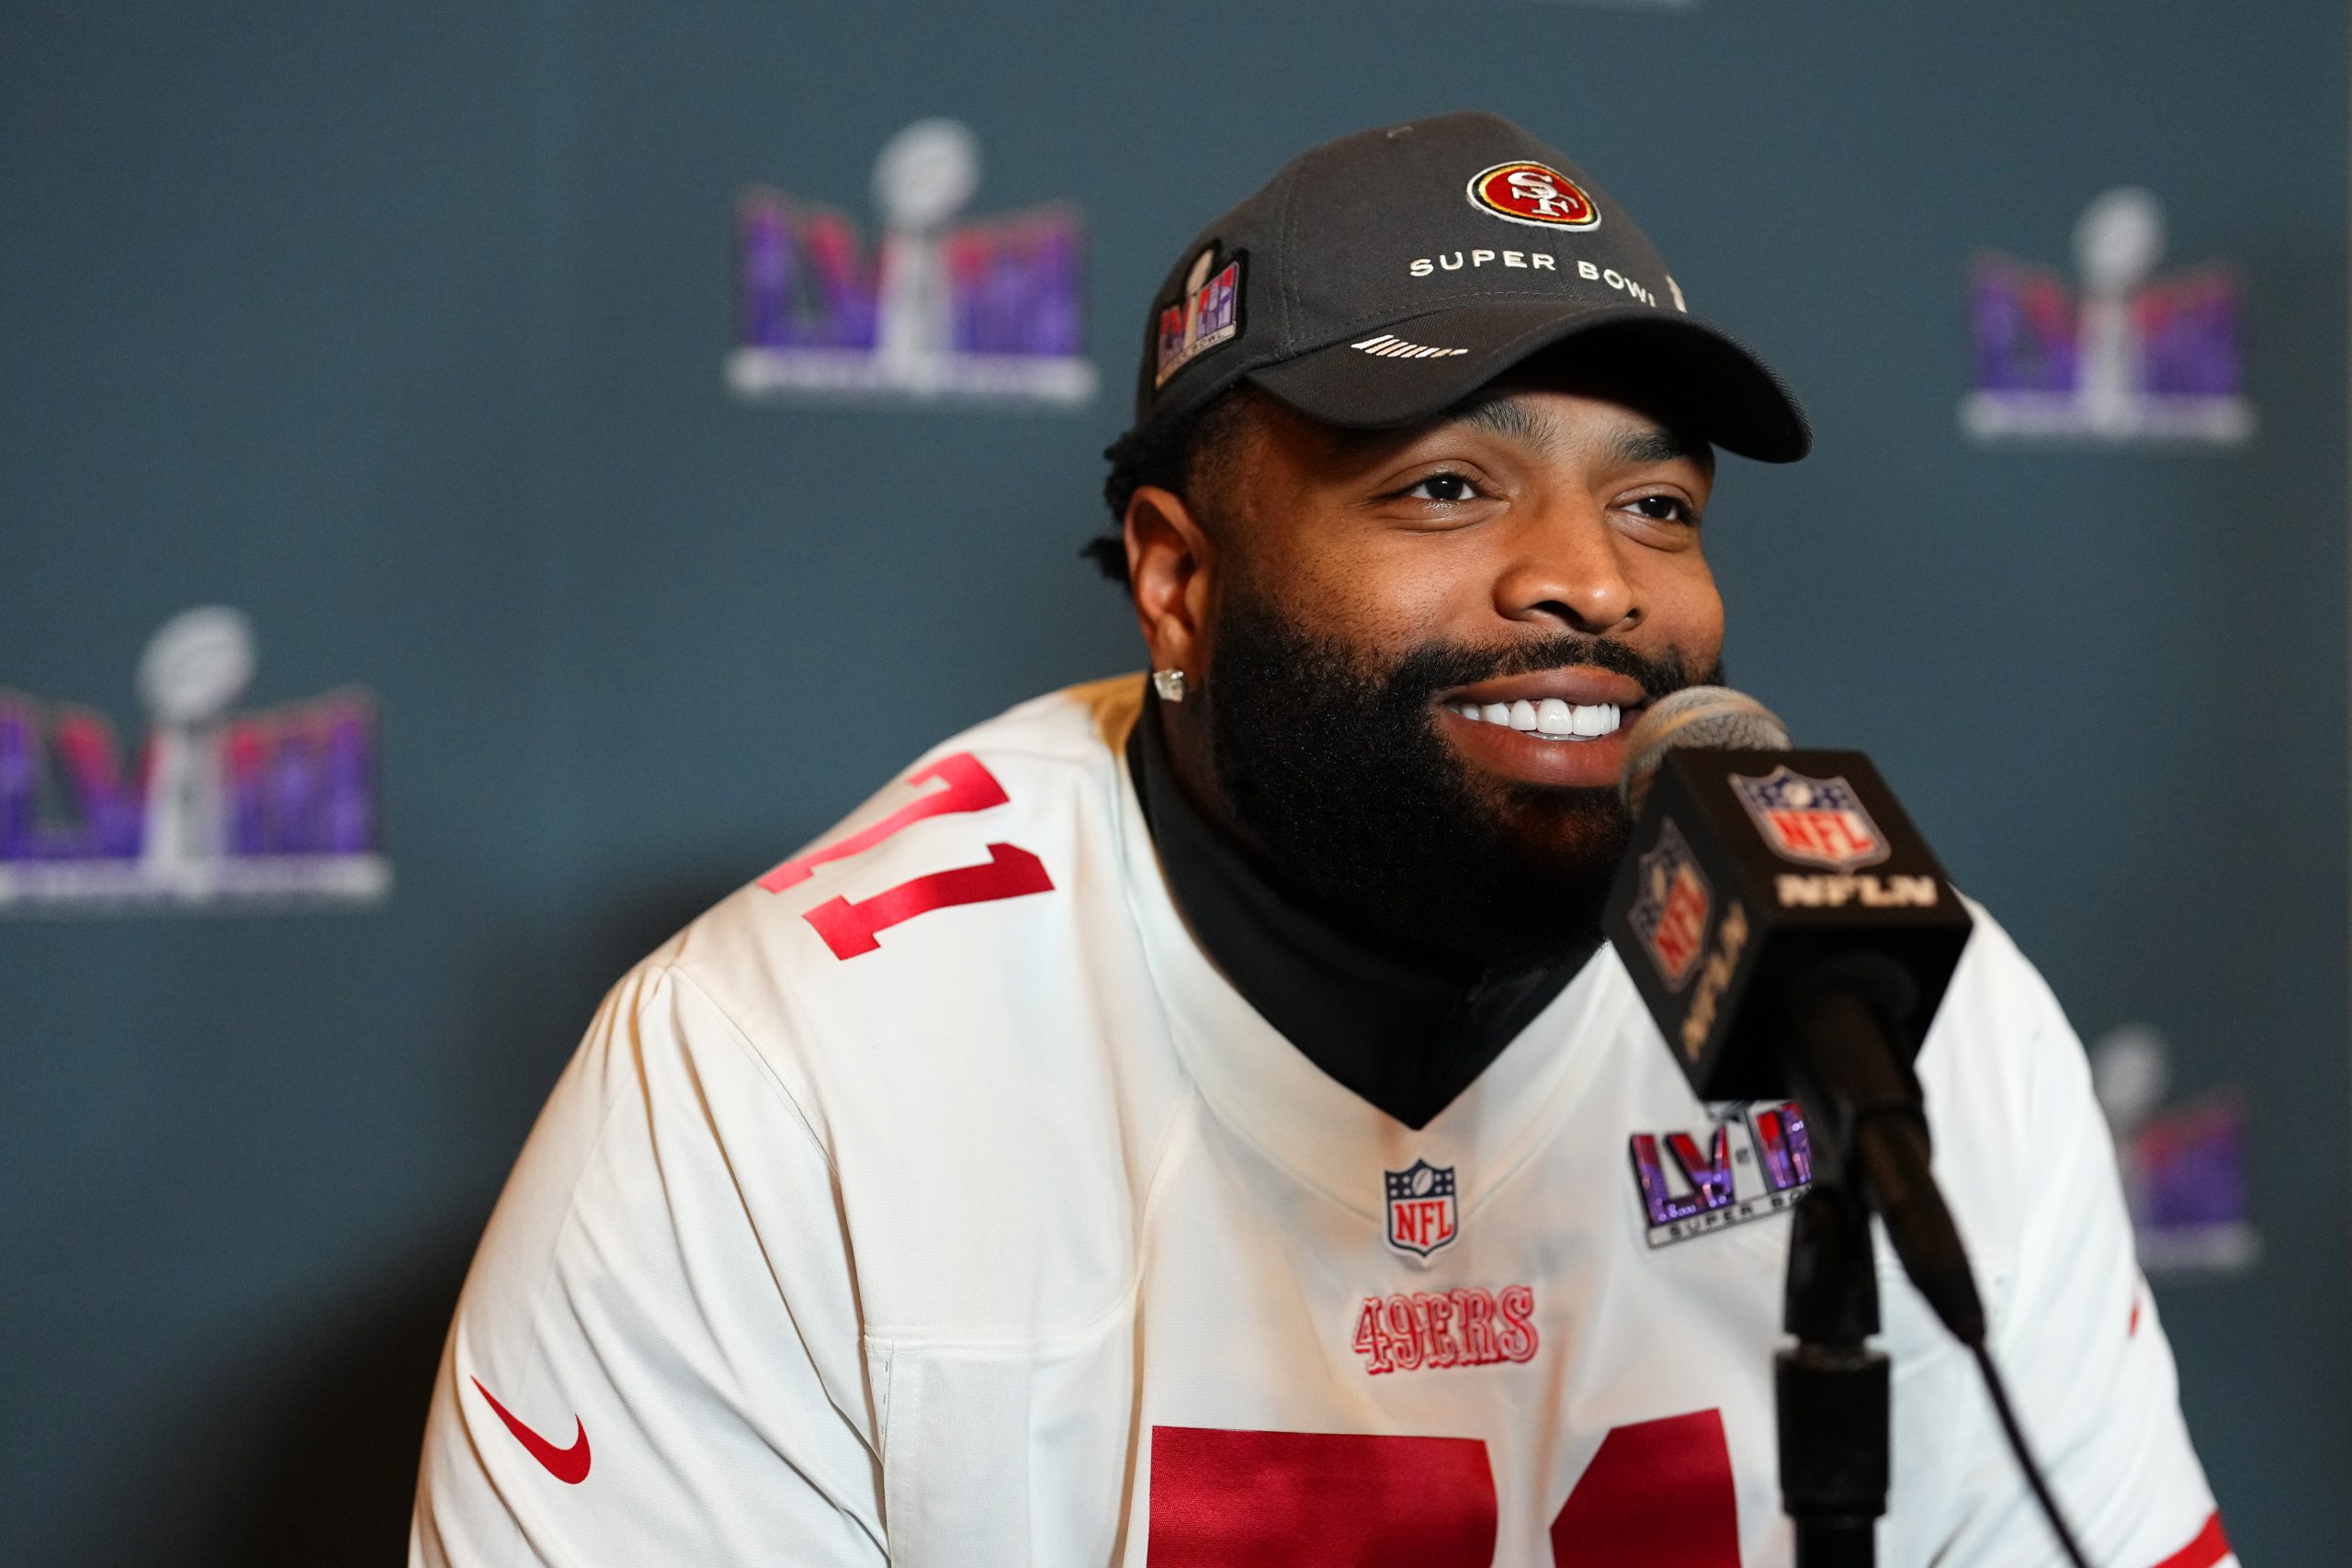 Trent Williams #71 speaks to media during San Francisco 49ers media availability ahead of Super Bow...